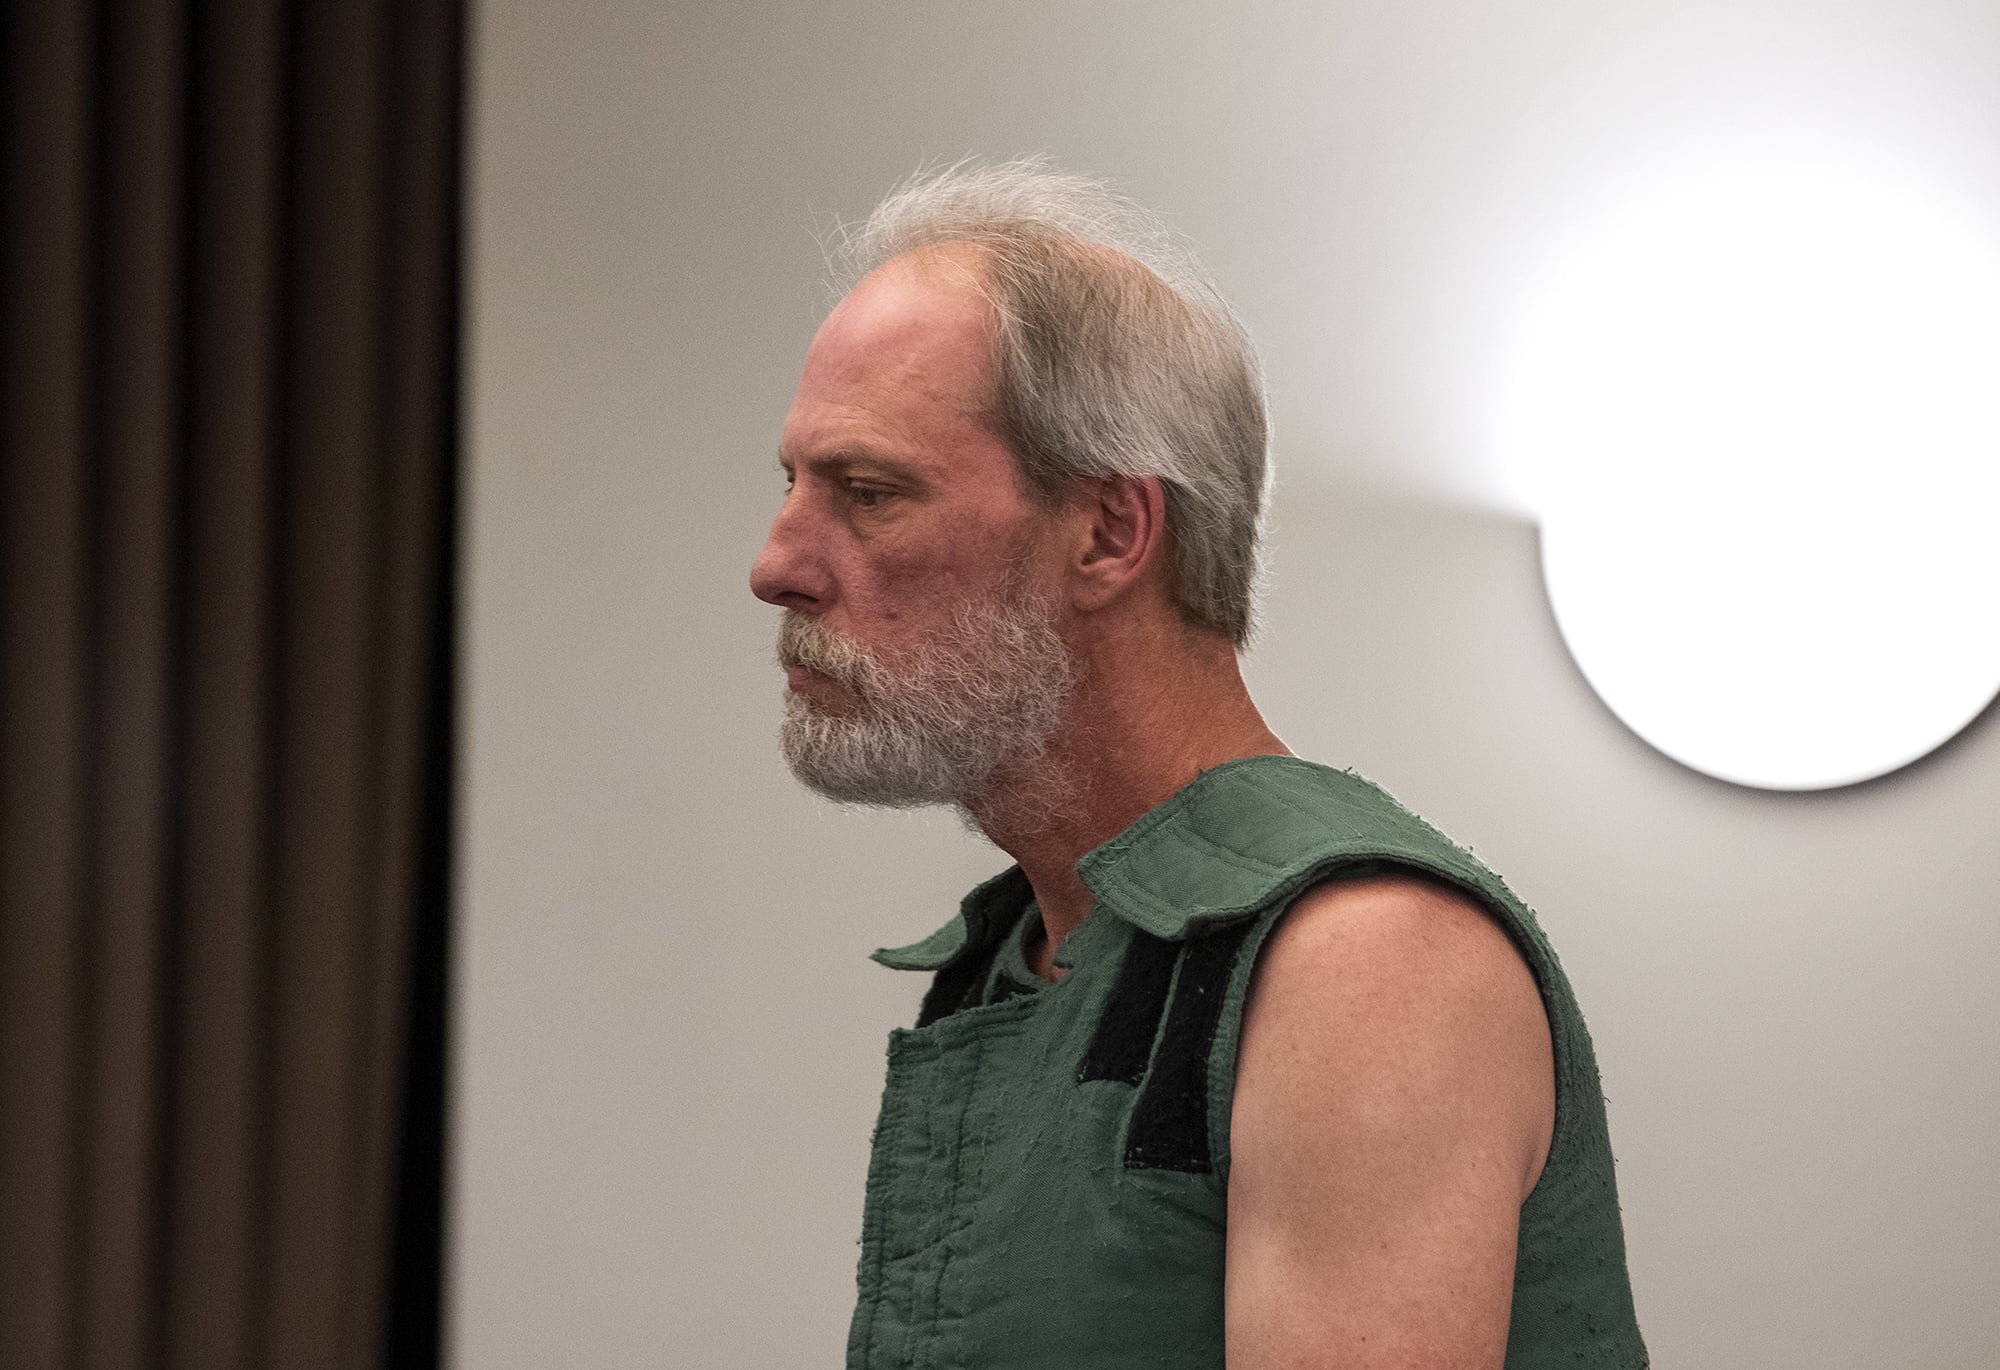 Richard Eugene Knapp, 57, makes a first appearance in Clark County Superior Court in connection with the 1994 rape and strangulation death of a woman in Vancouver, on May 1, 2019.